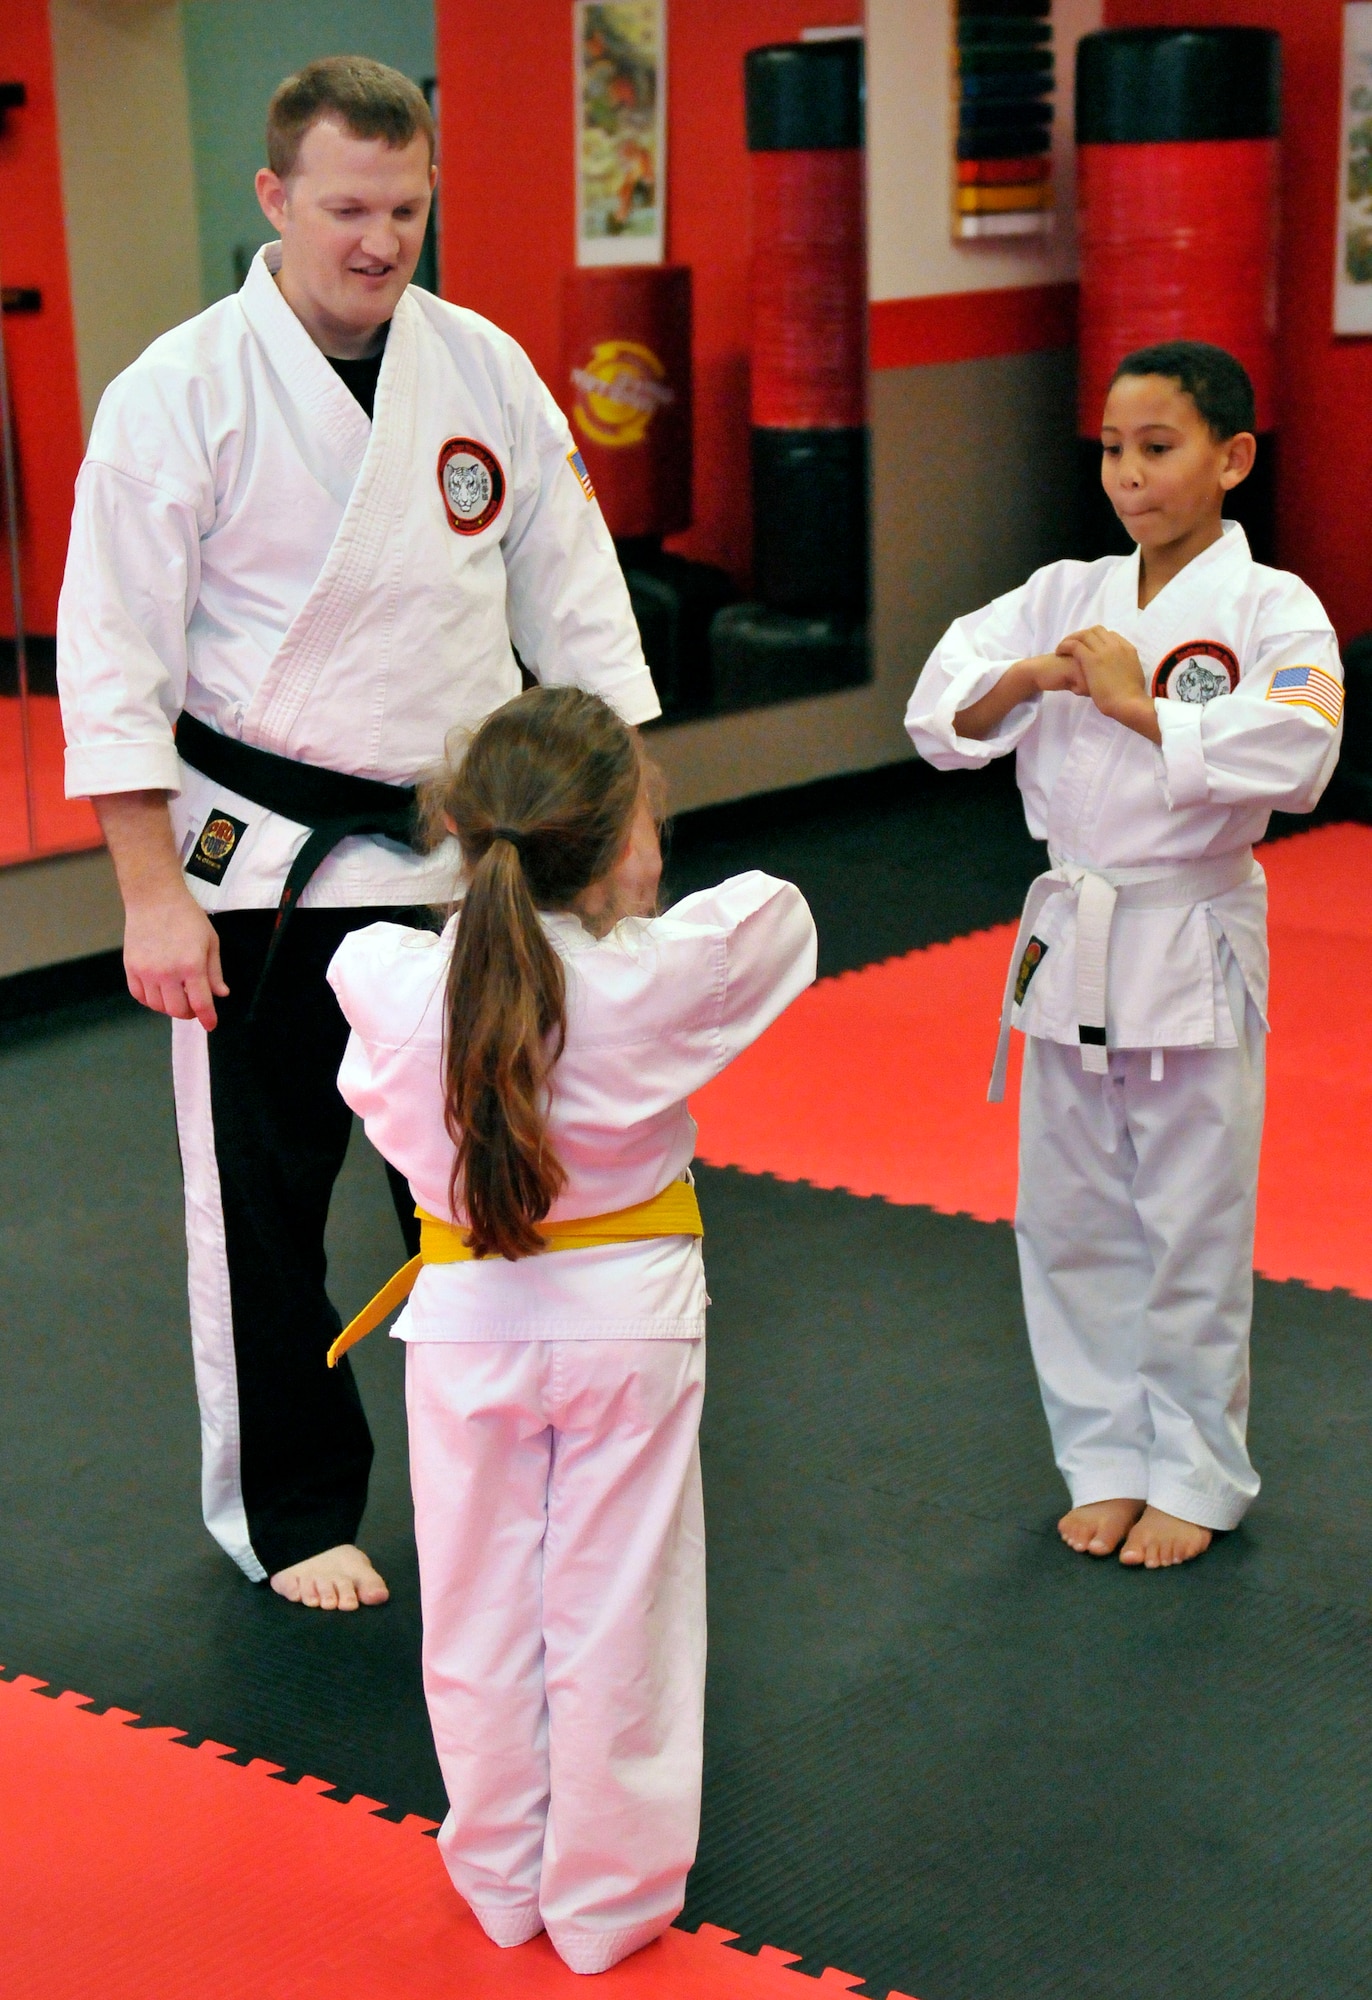 Staff Sgt. Chris Cowgill, a command post controller for the 125th Fighter Wing, leads a children's Shoalin Kempo class Jan. 9, at his studio in Orange Park, Florida. Cowgill opened the studio with his wife and business partner, and he teaches Shoalin Kempo to students of all ages during his off-duty days. (U.S. Air National Guard photo by Tech. Sgt. William Buchanan/ Released)
 